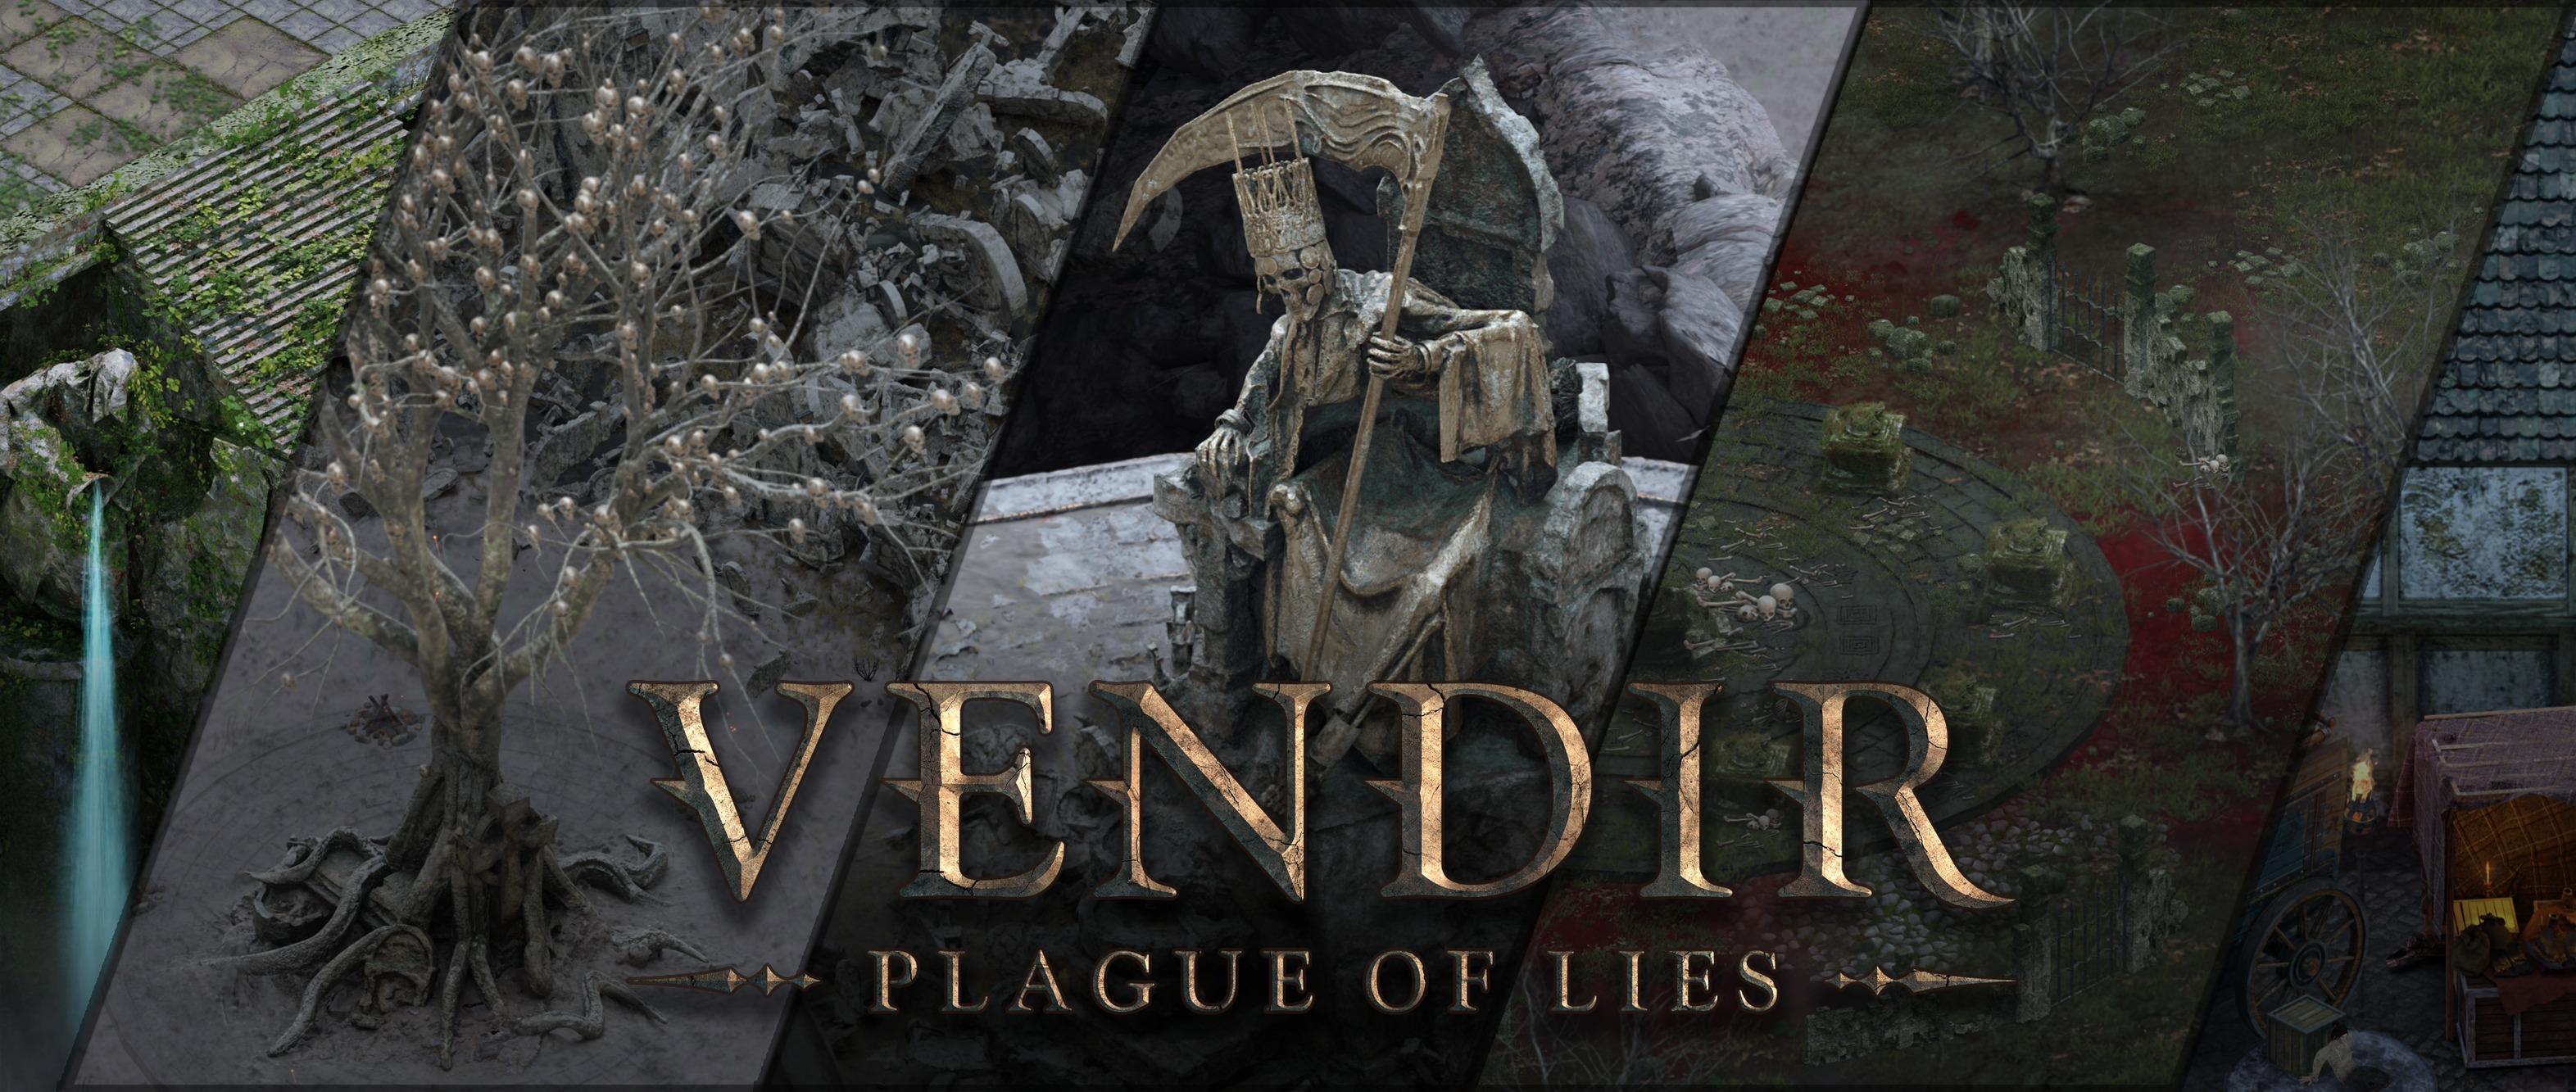 The old-school RPG Sell: Plague Of Lies